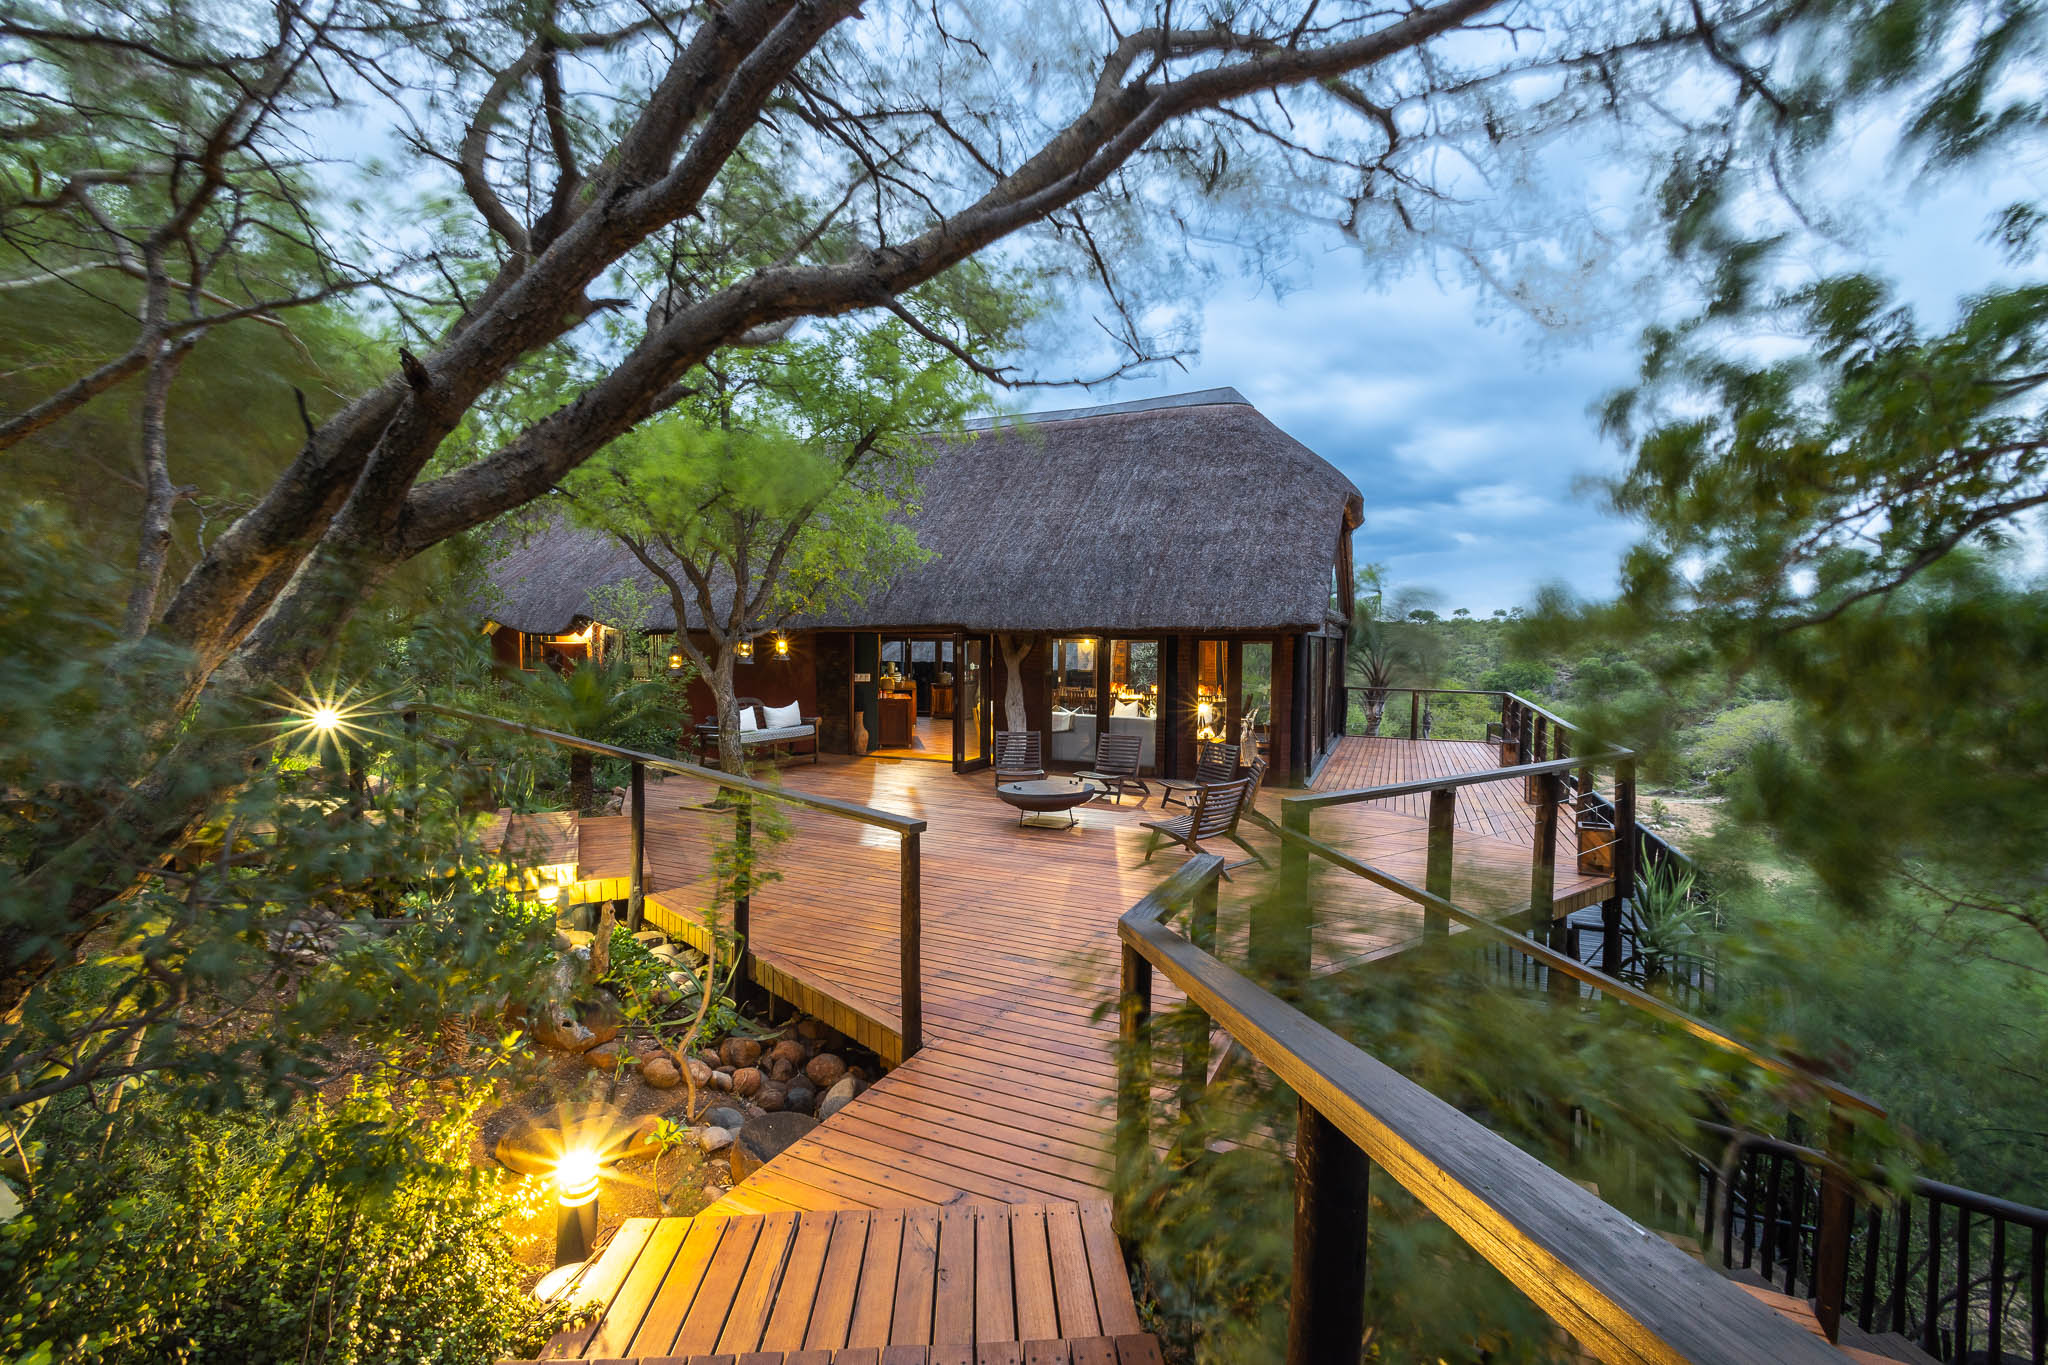 Boma Area and Wooden Viewing Deck